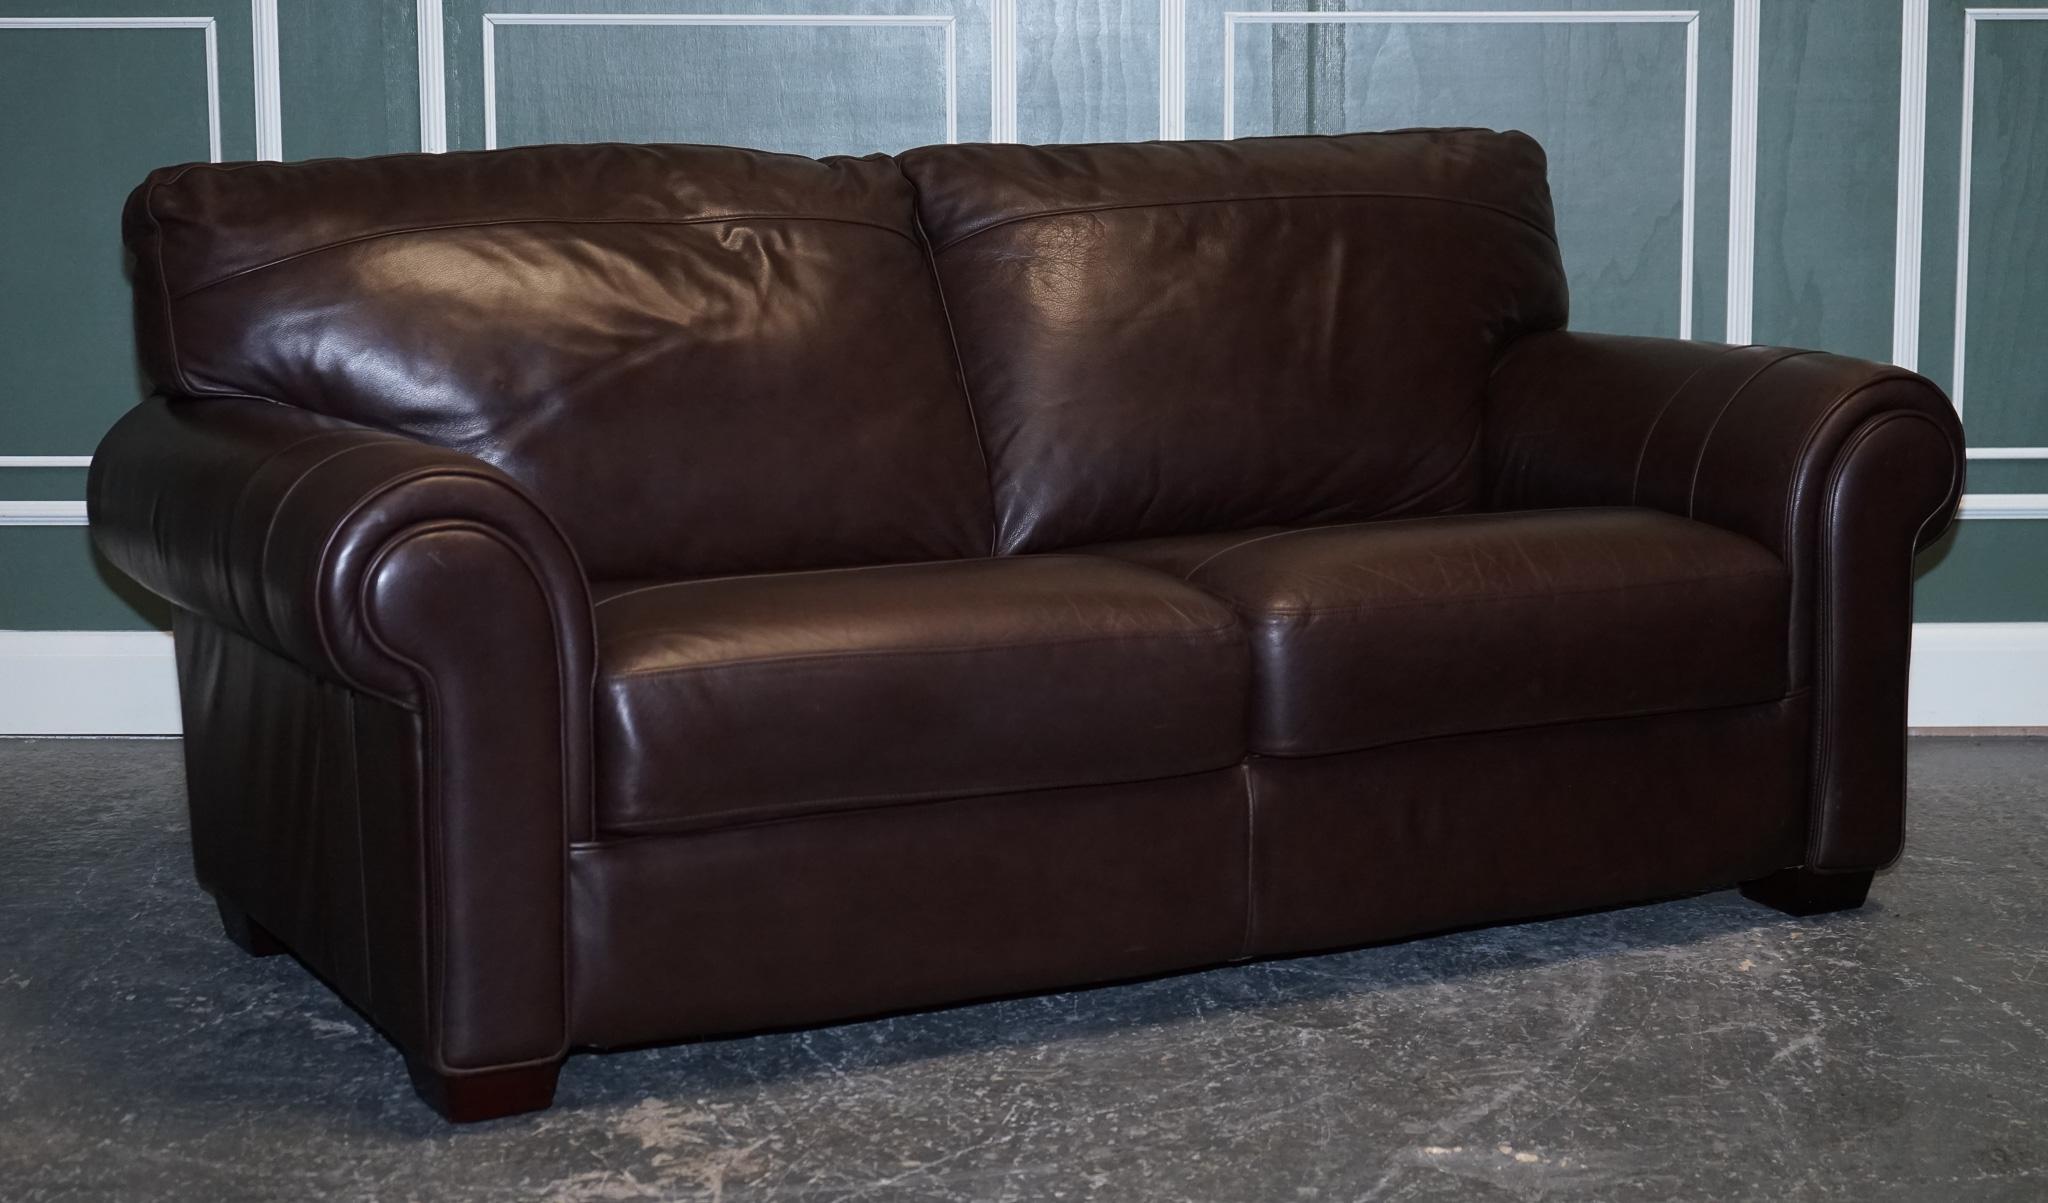 We are excited to present this stunning comfortable brown leather three to the four-seater sofa.
A good honest comfortable sofa that seats 3 to 4 people.
The cushions are also attached to the sofa.

They are upholstered with cowhide semi-aniline